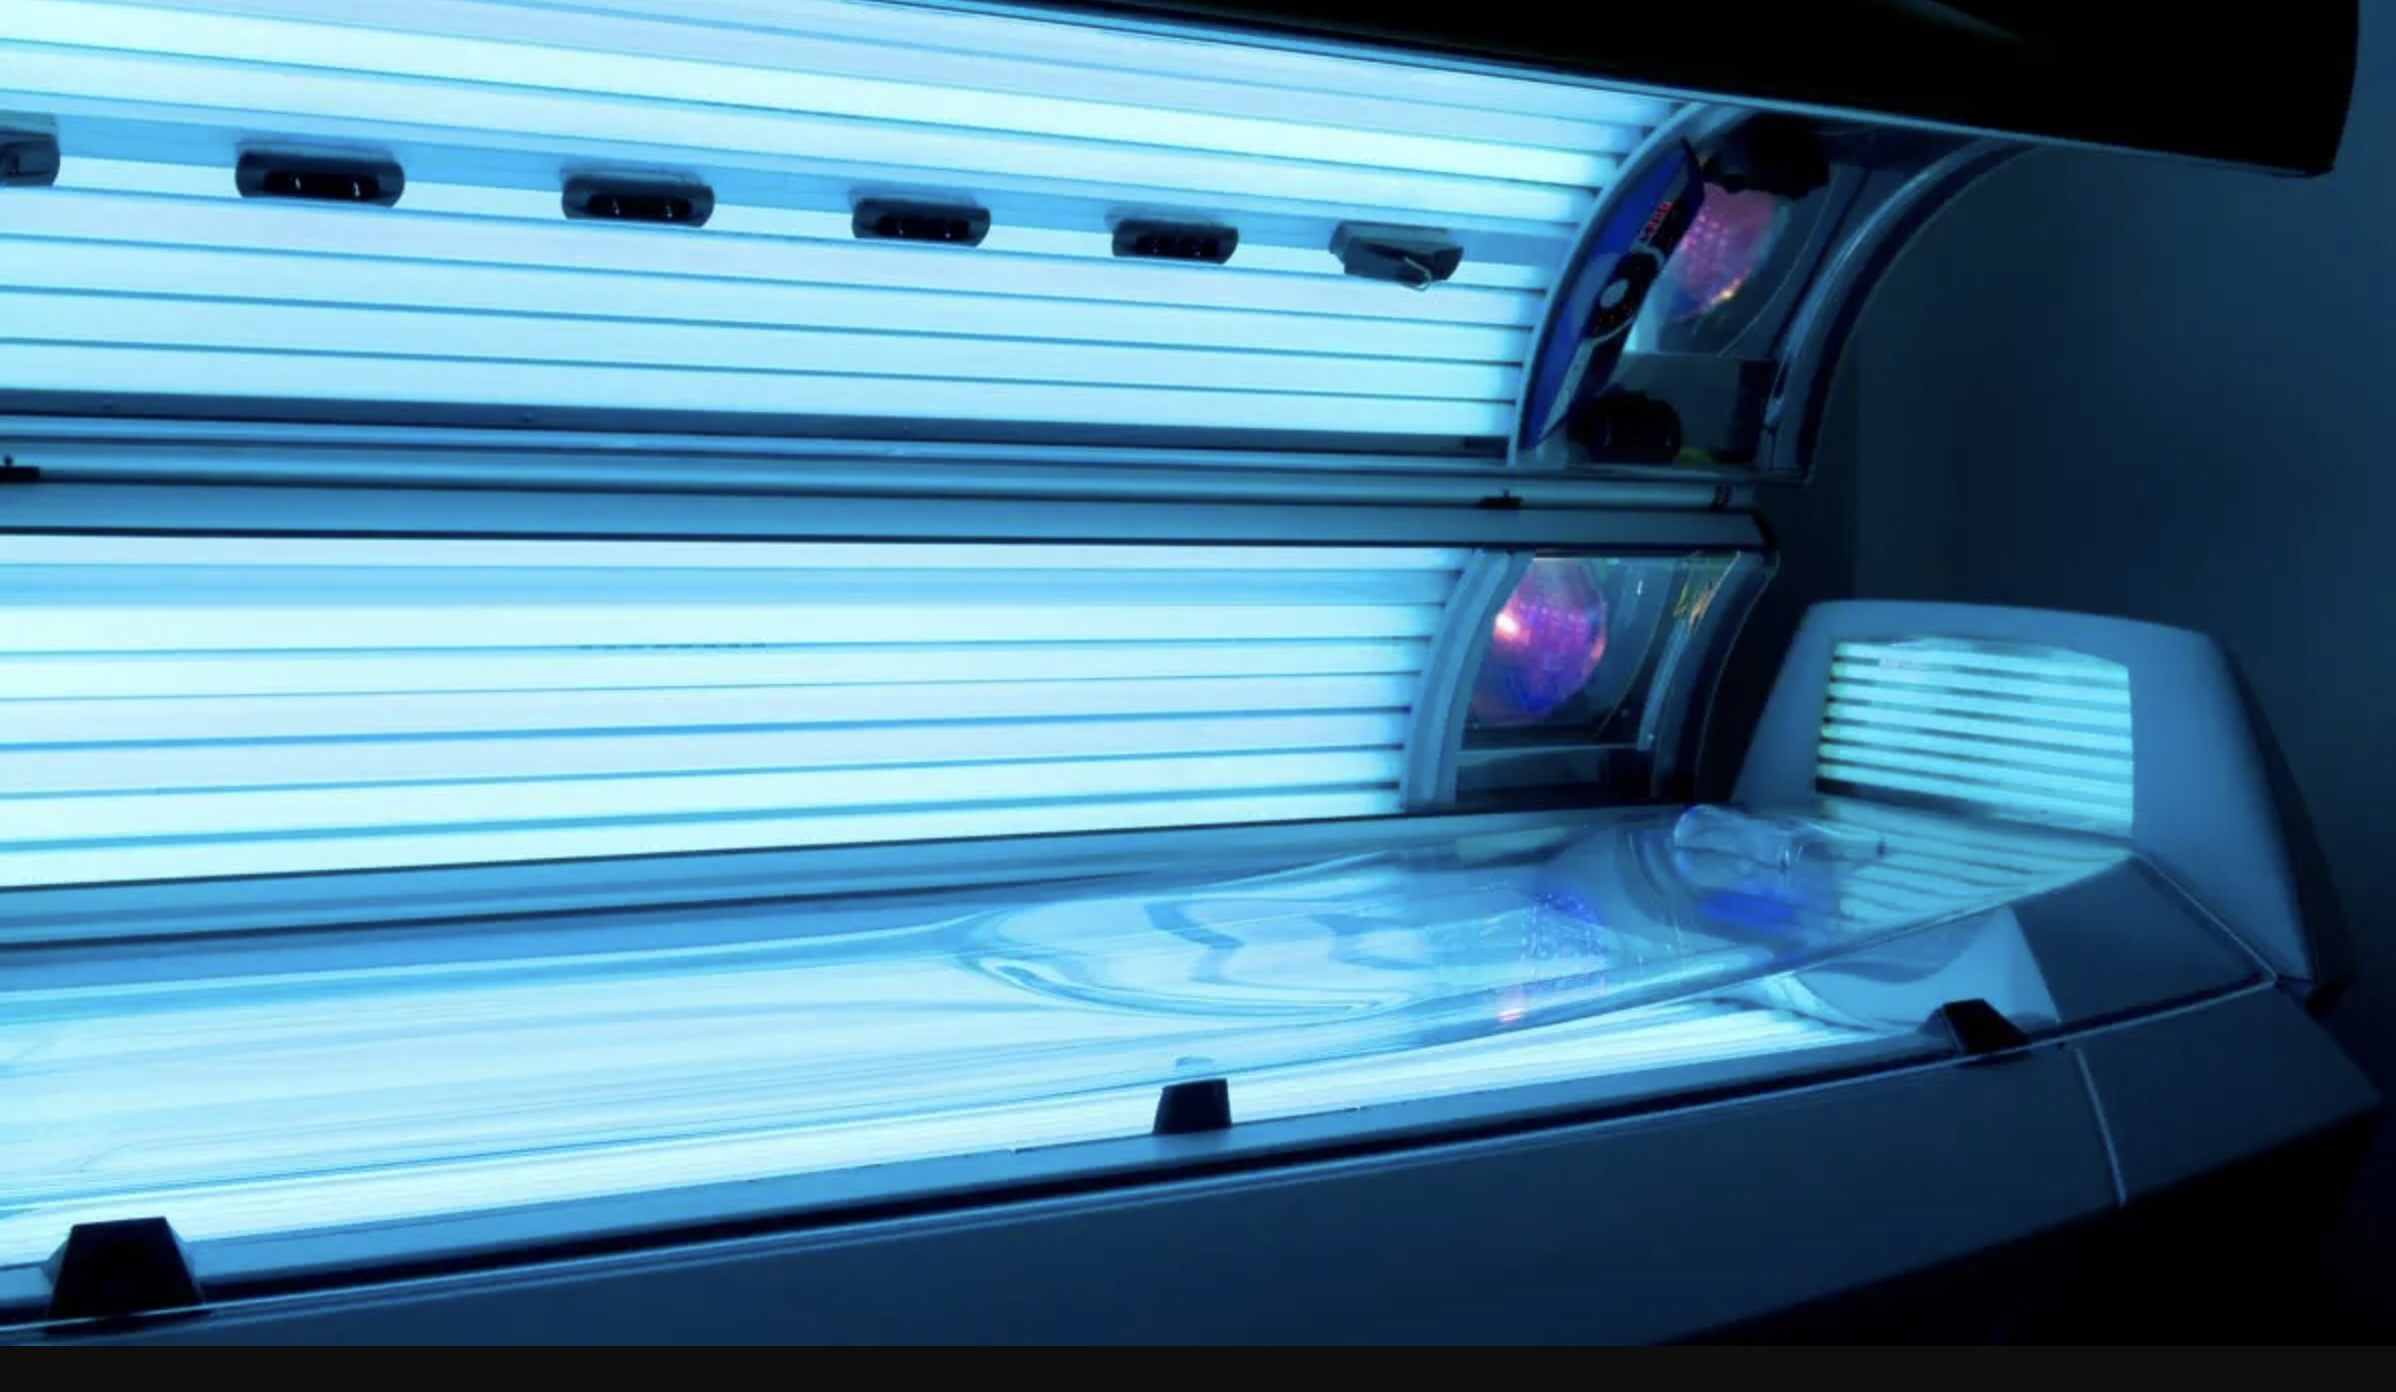 Popular gyms undermining health with tanning beds